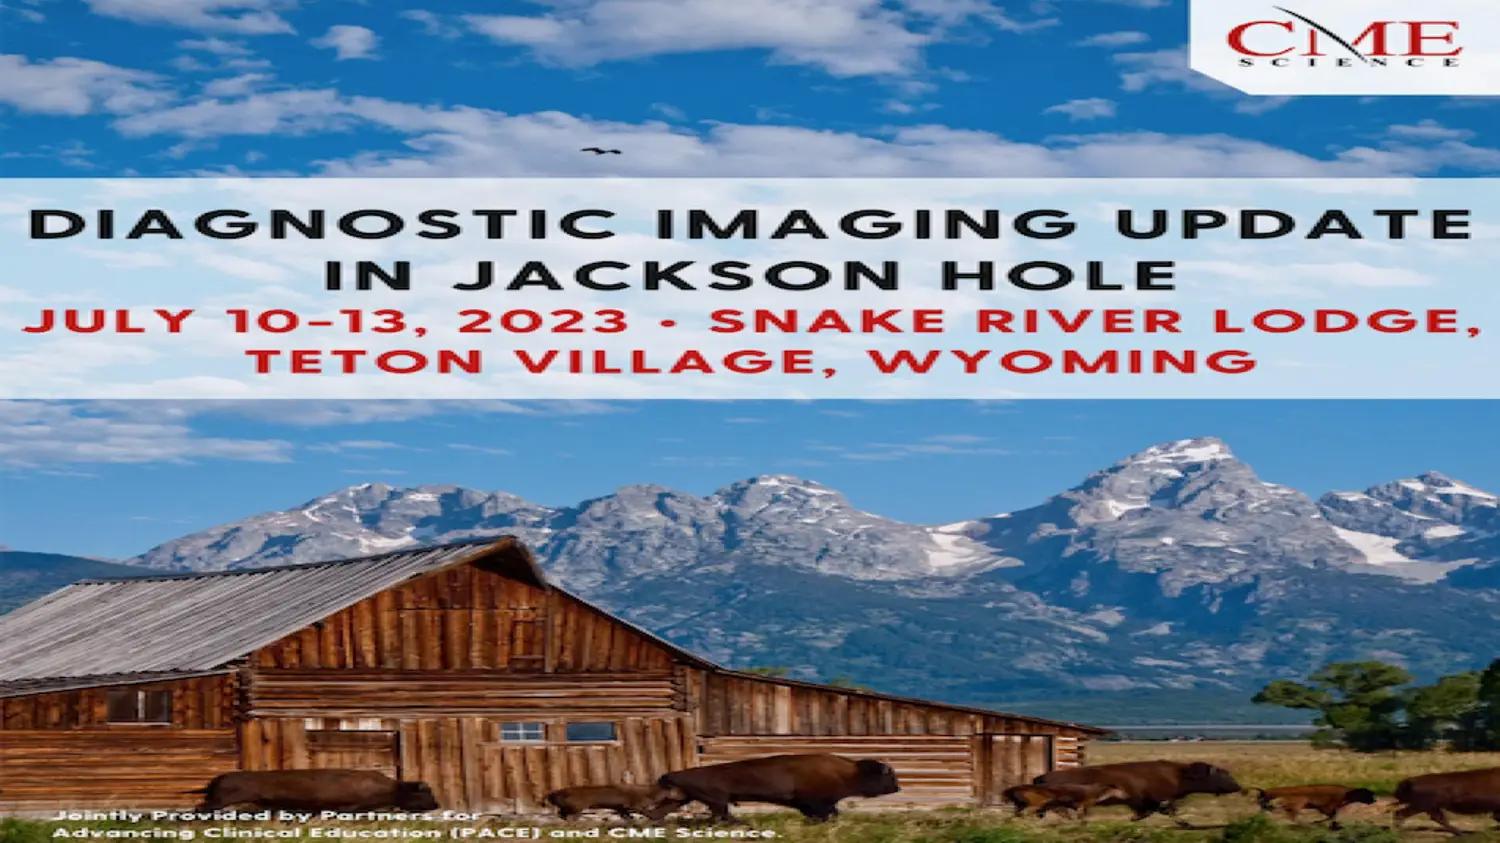 Diagnostic Imaging Update in Jackson Hole